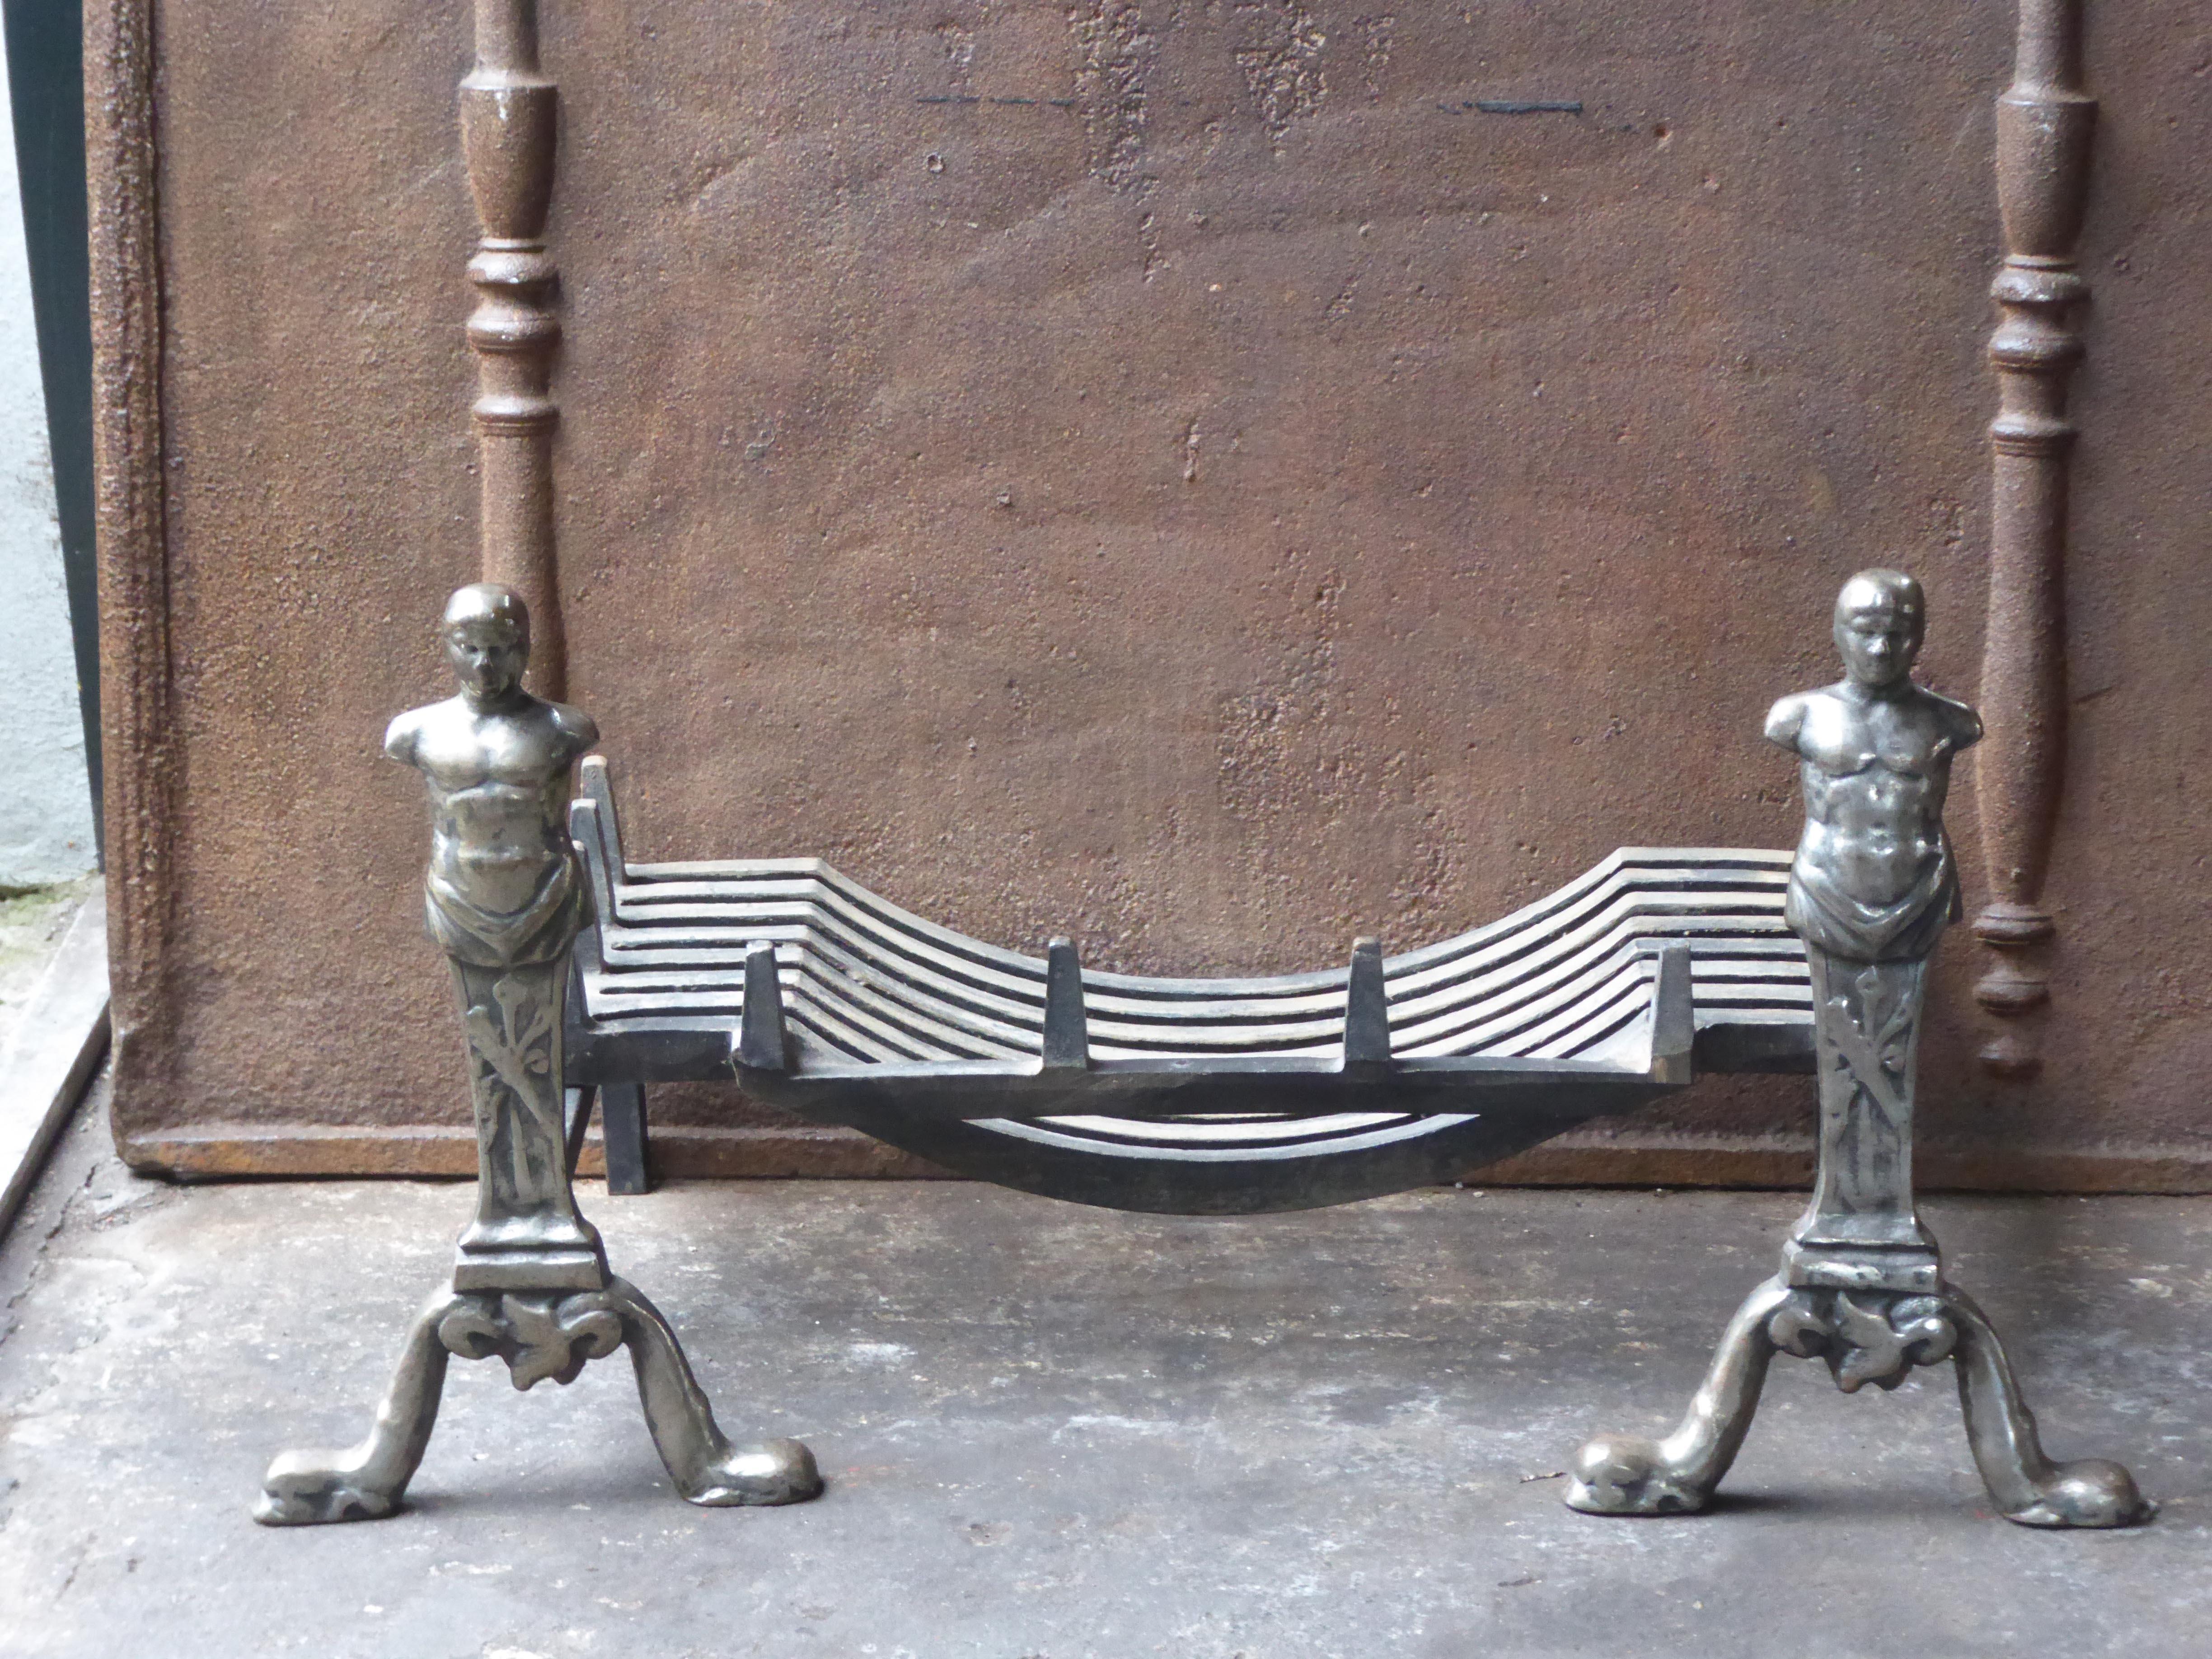 English Victorian style fireplace basket or fire basket. The fireplace grate is made of cast iron and wrought iron. The total width of the front of the grate is 32 inch (81 cm).

















 